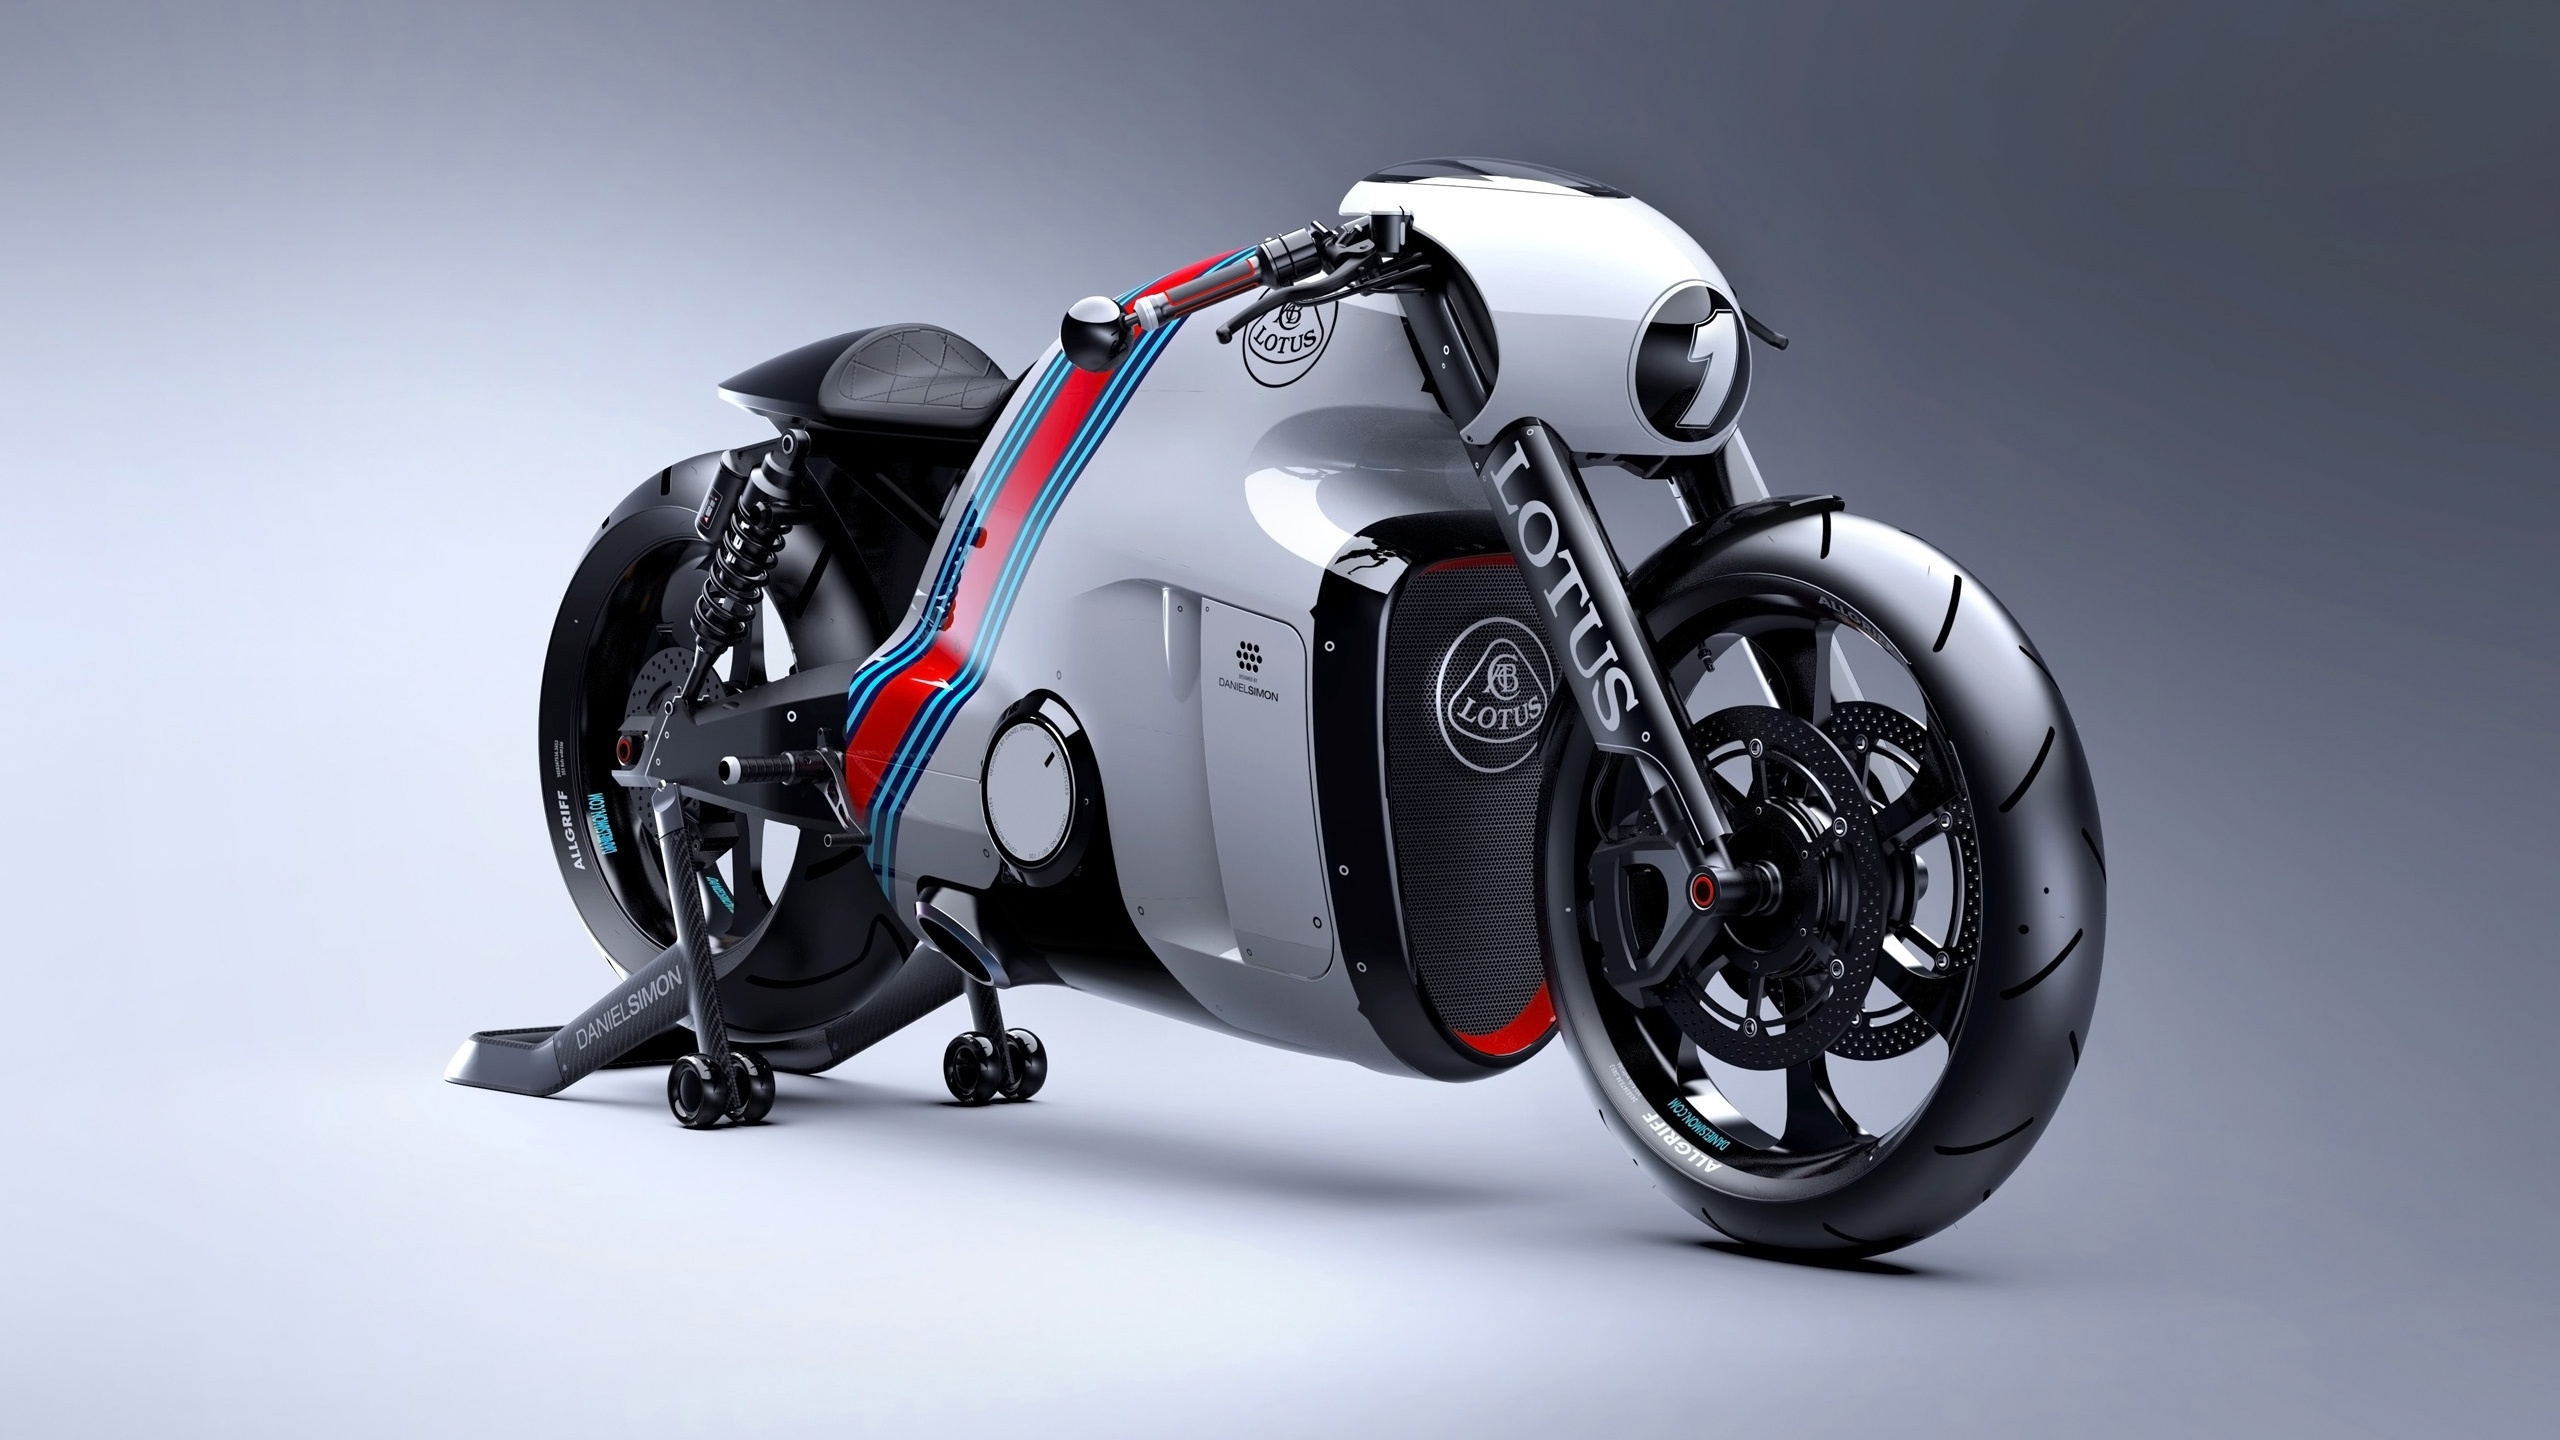 Lotus Motorcycle for 2560x1440 HDTV resolution